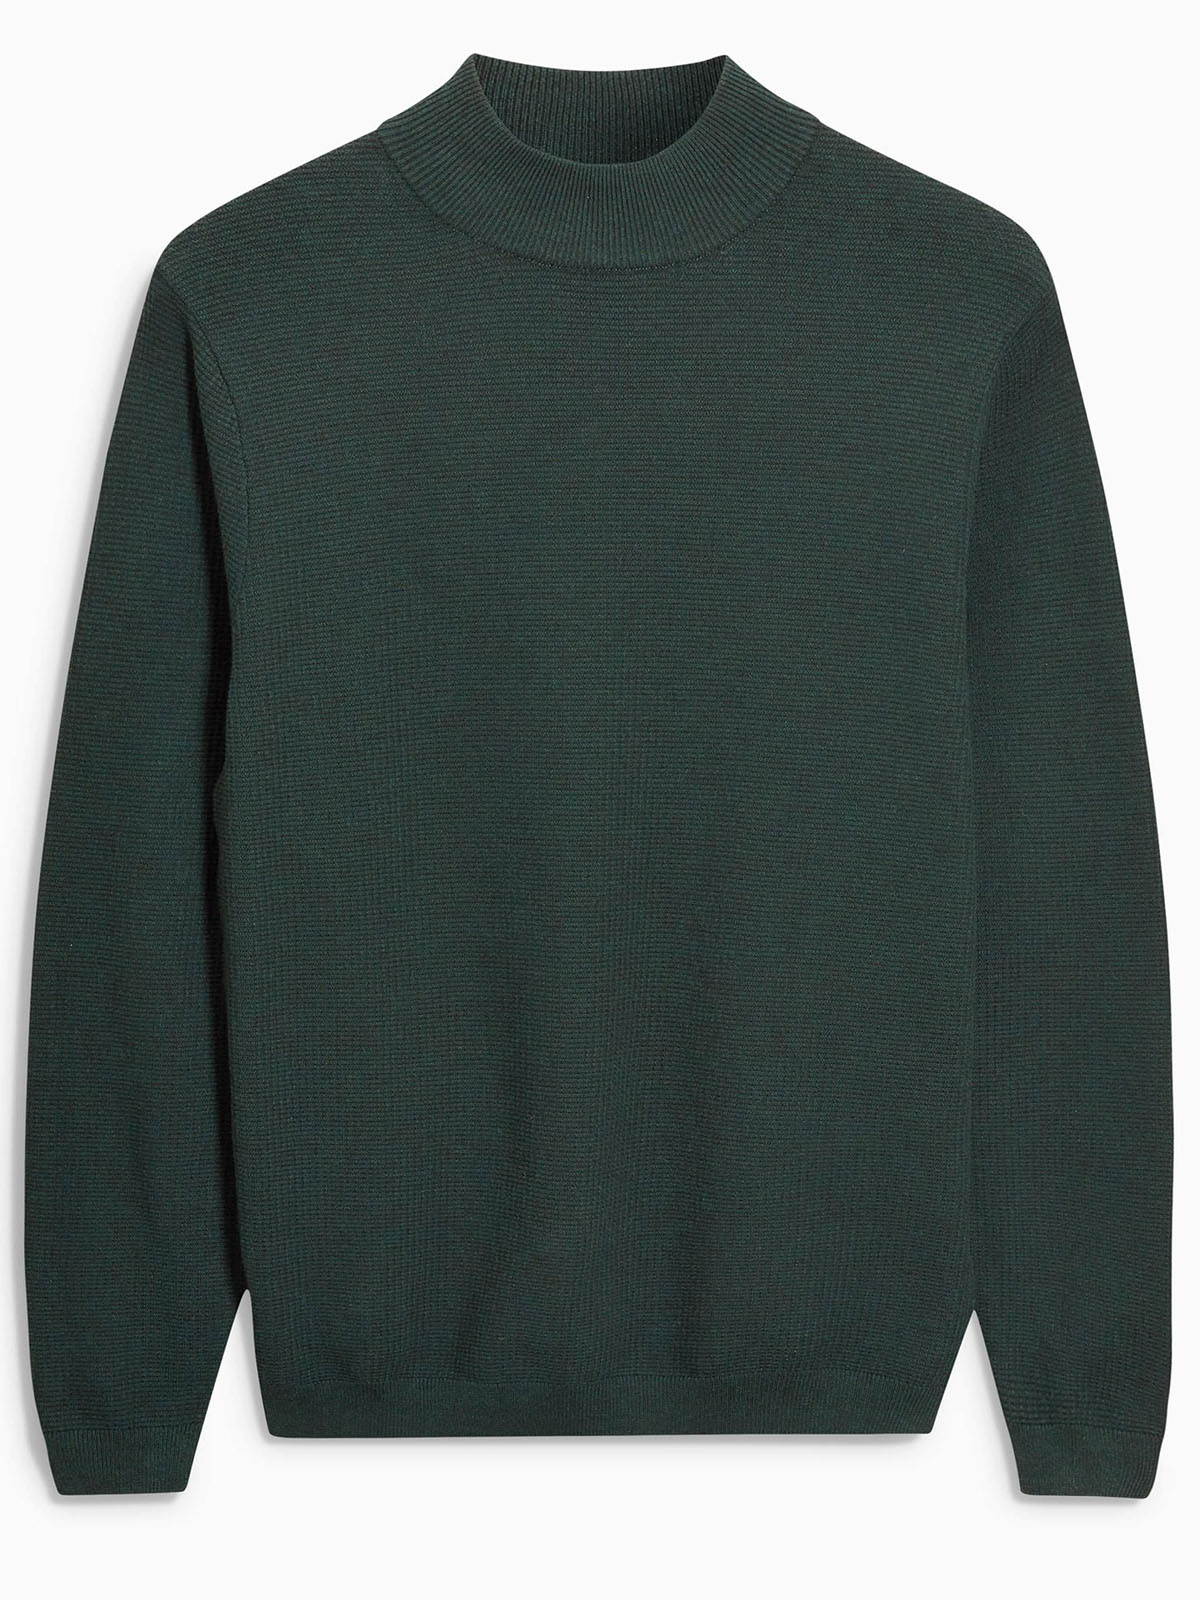 N3xt GREEN Pure Cotton High Neck Knitted Jumper - Size XSmall to XLarge